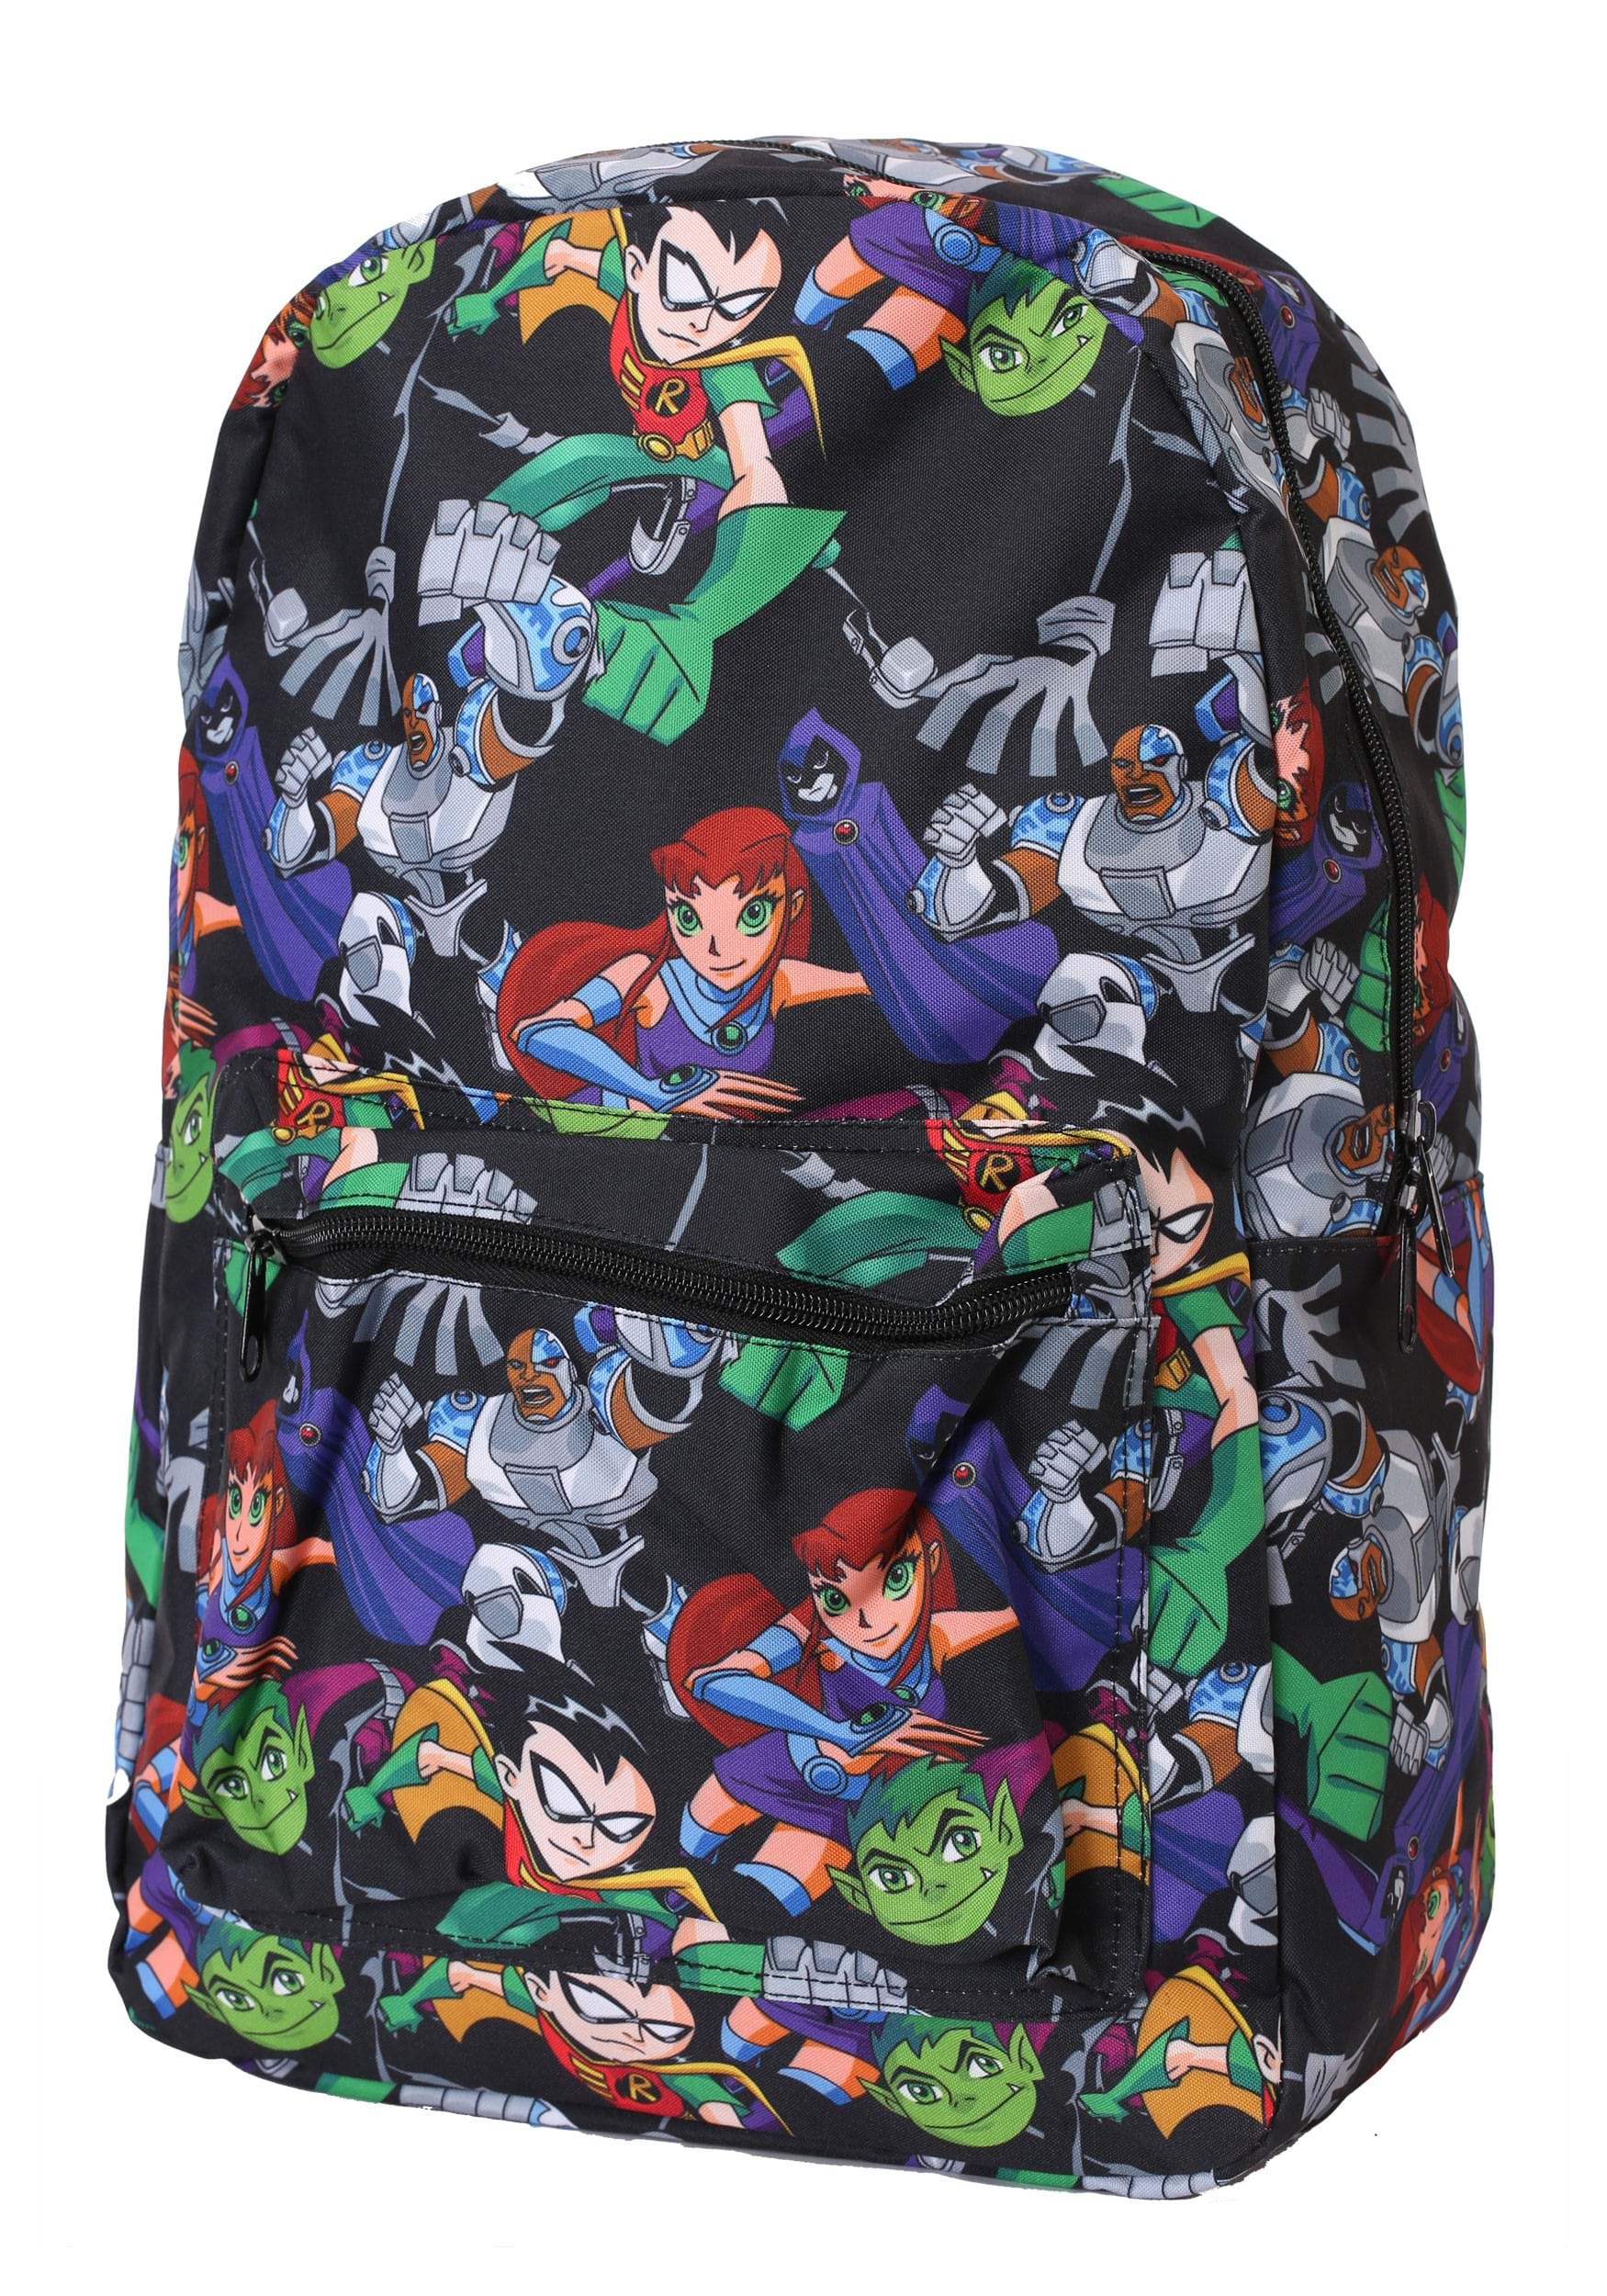 Teen Titans Go! All Over Print Back Pack | DC Bags